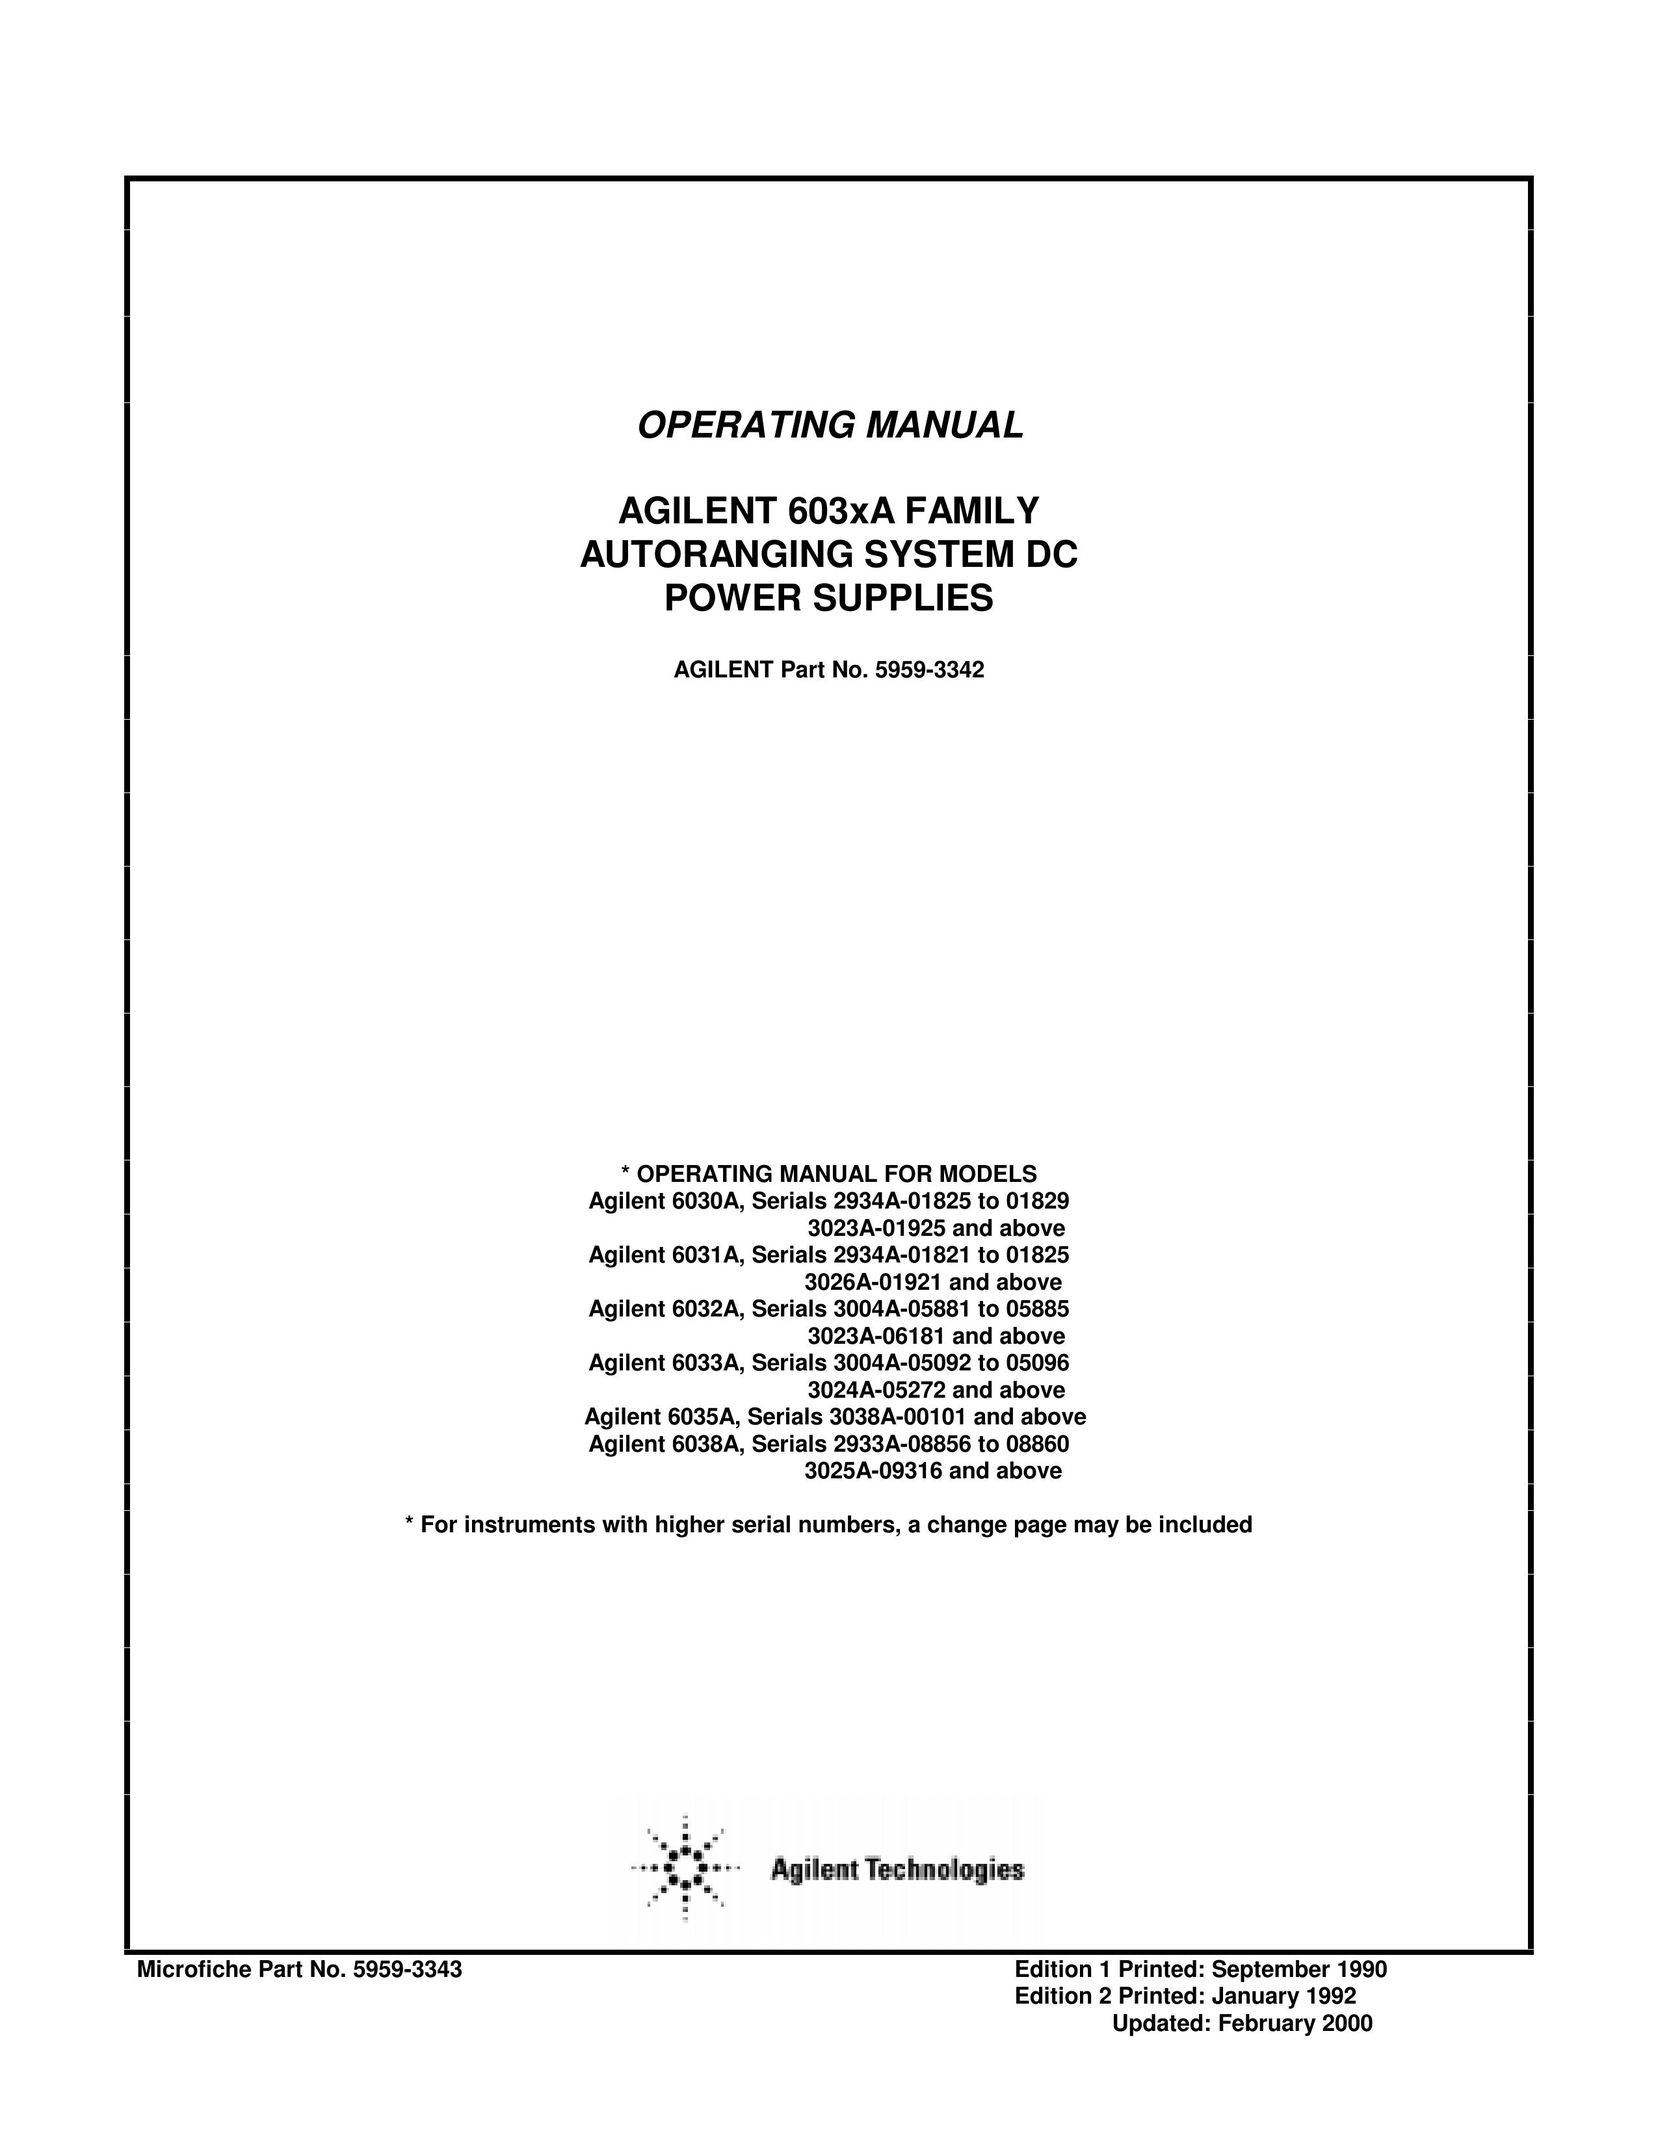 Agilent Technologies Serials 2933A-08856 to 08860 3025A-09316 and Video Gaming Accessories User Manual (Page 1)